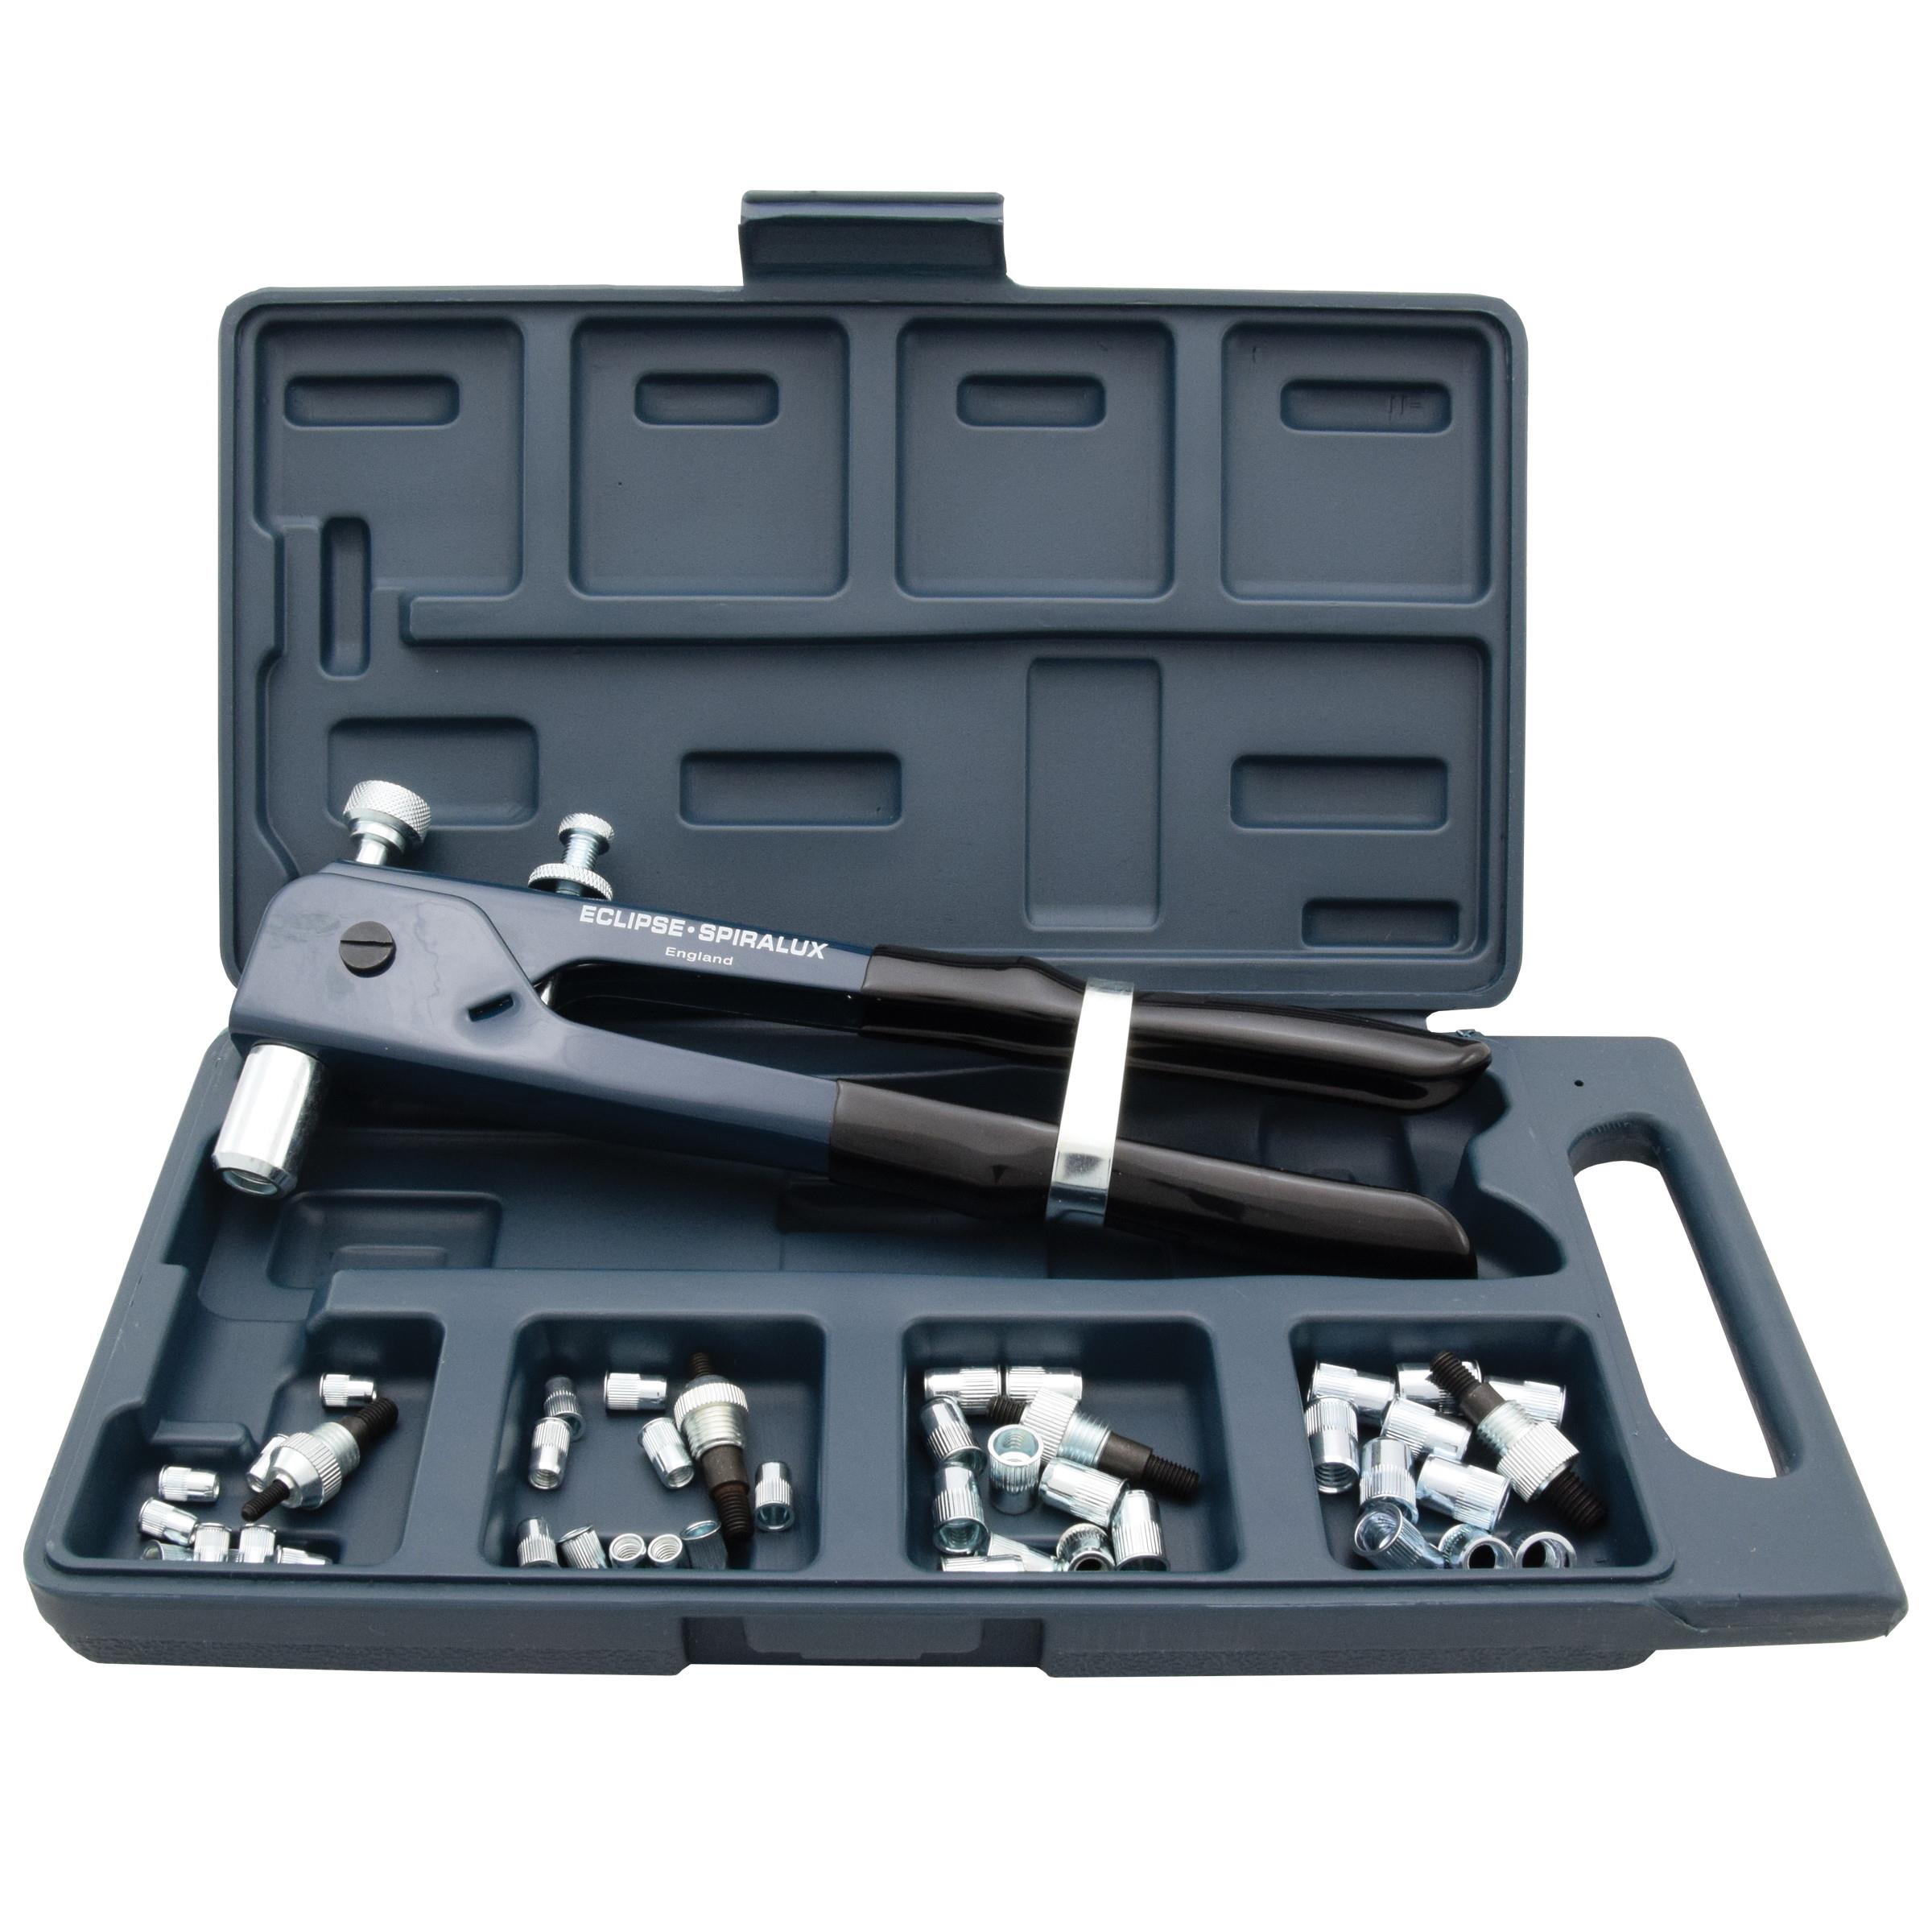 Eclipse 2745 Rivet Nut Hand Tool; 4-8mm; Complete With 4, 5, 6 And 8mm Noses; Includes Selection Of Rivet Nuts